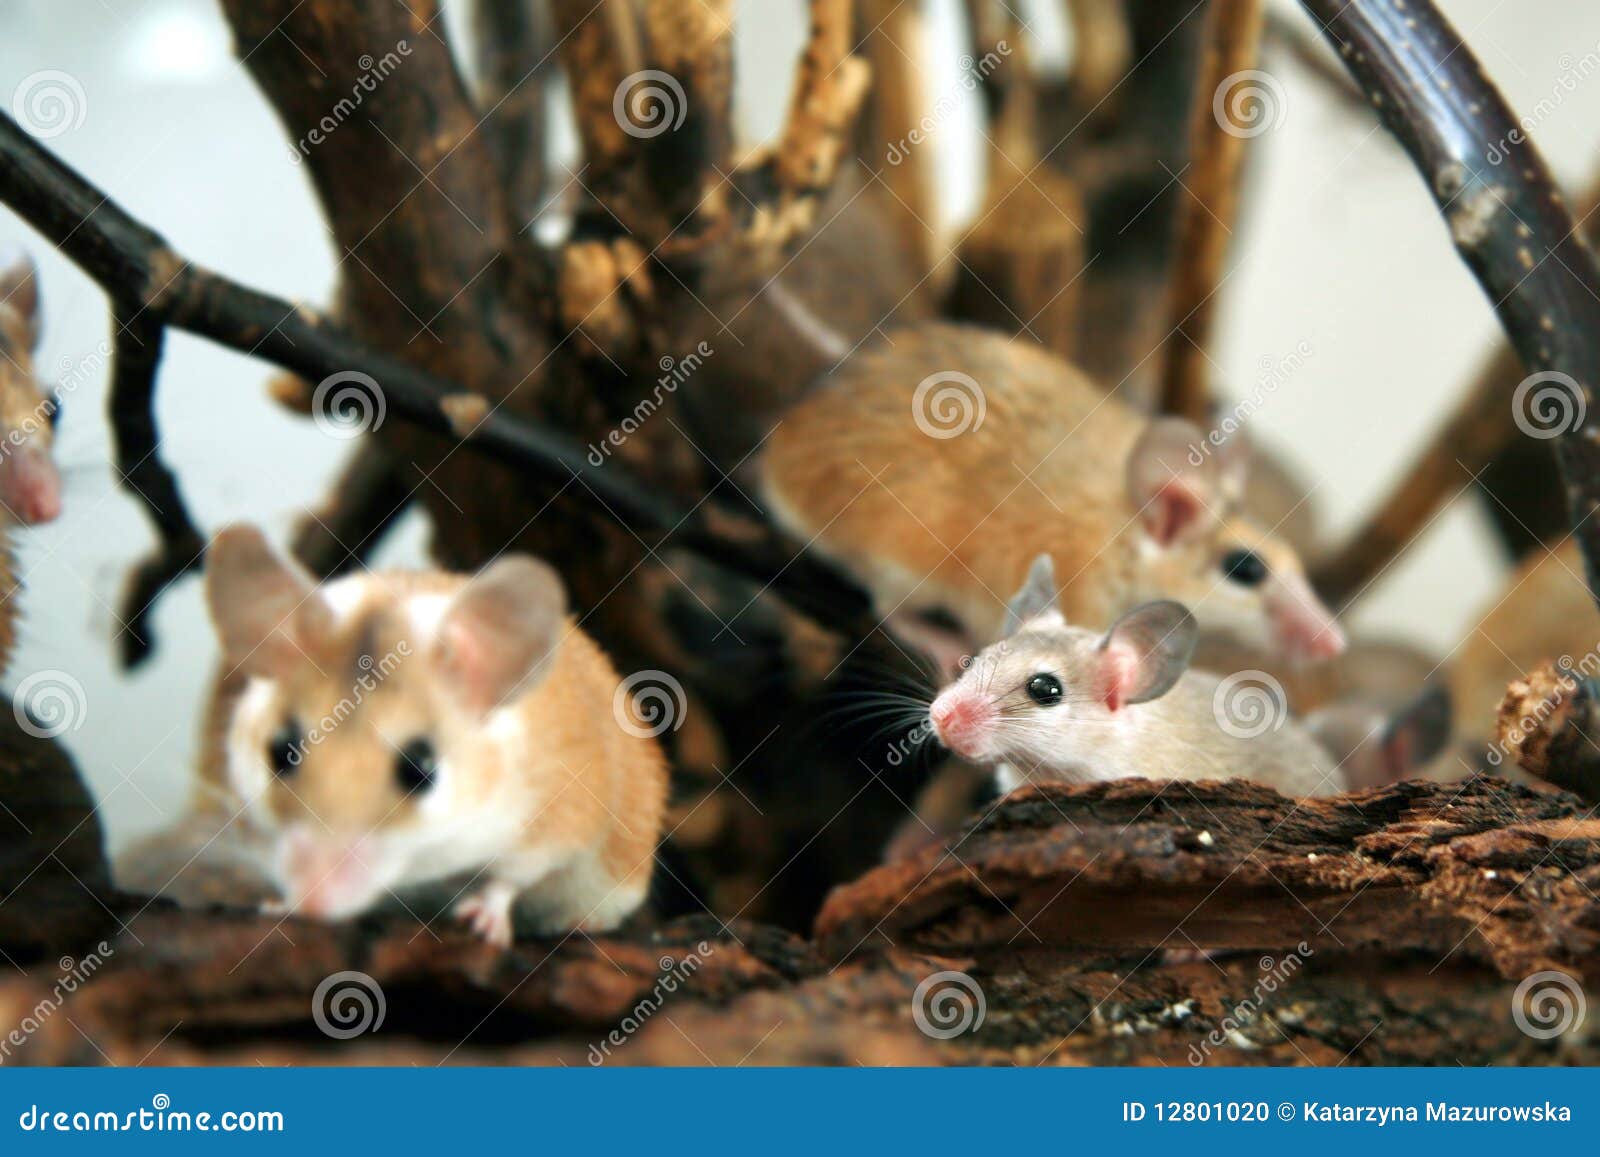 Mouse Live Trap with Captured Mouse, Outdoors Stock Photo - Image of  danger, equipment: 40268316